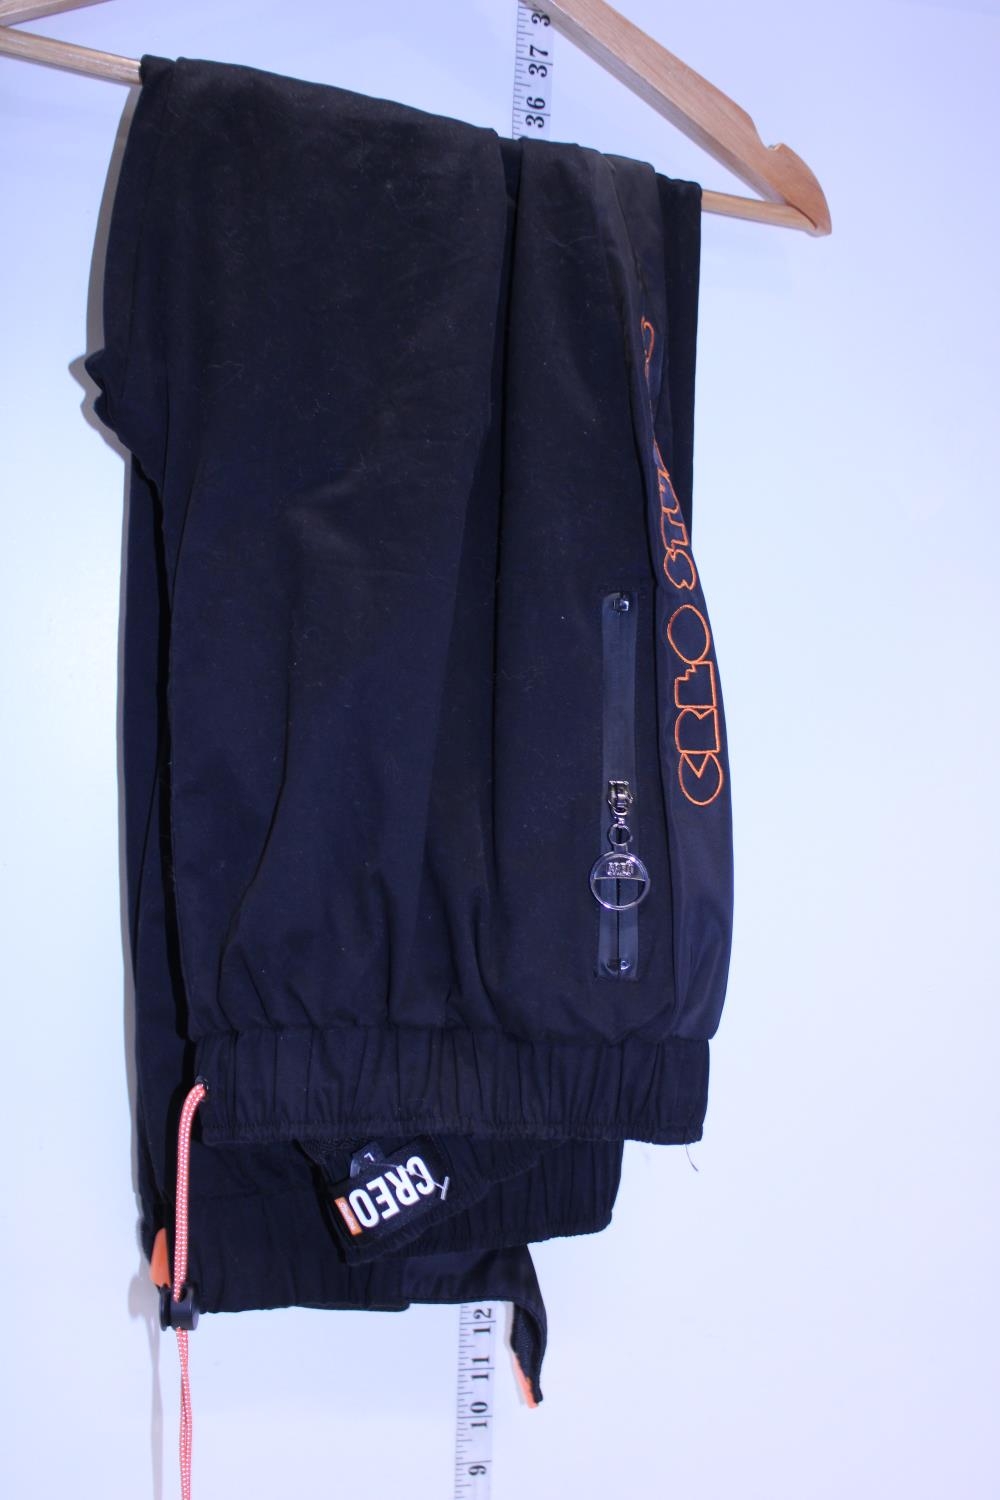 A pair of Creo trousers size L